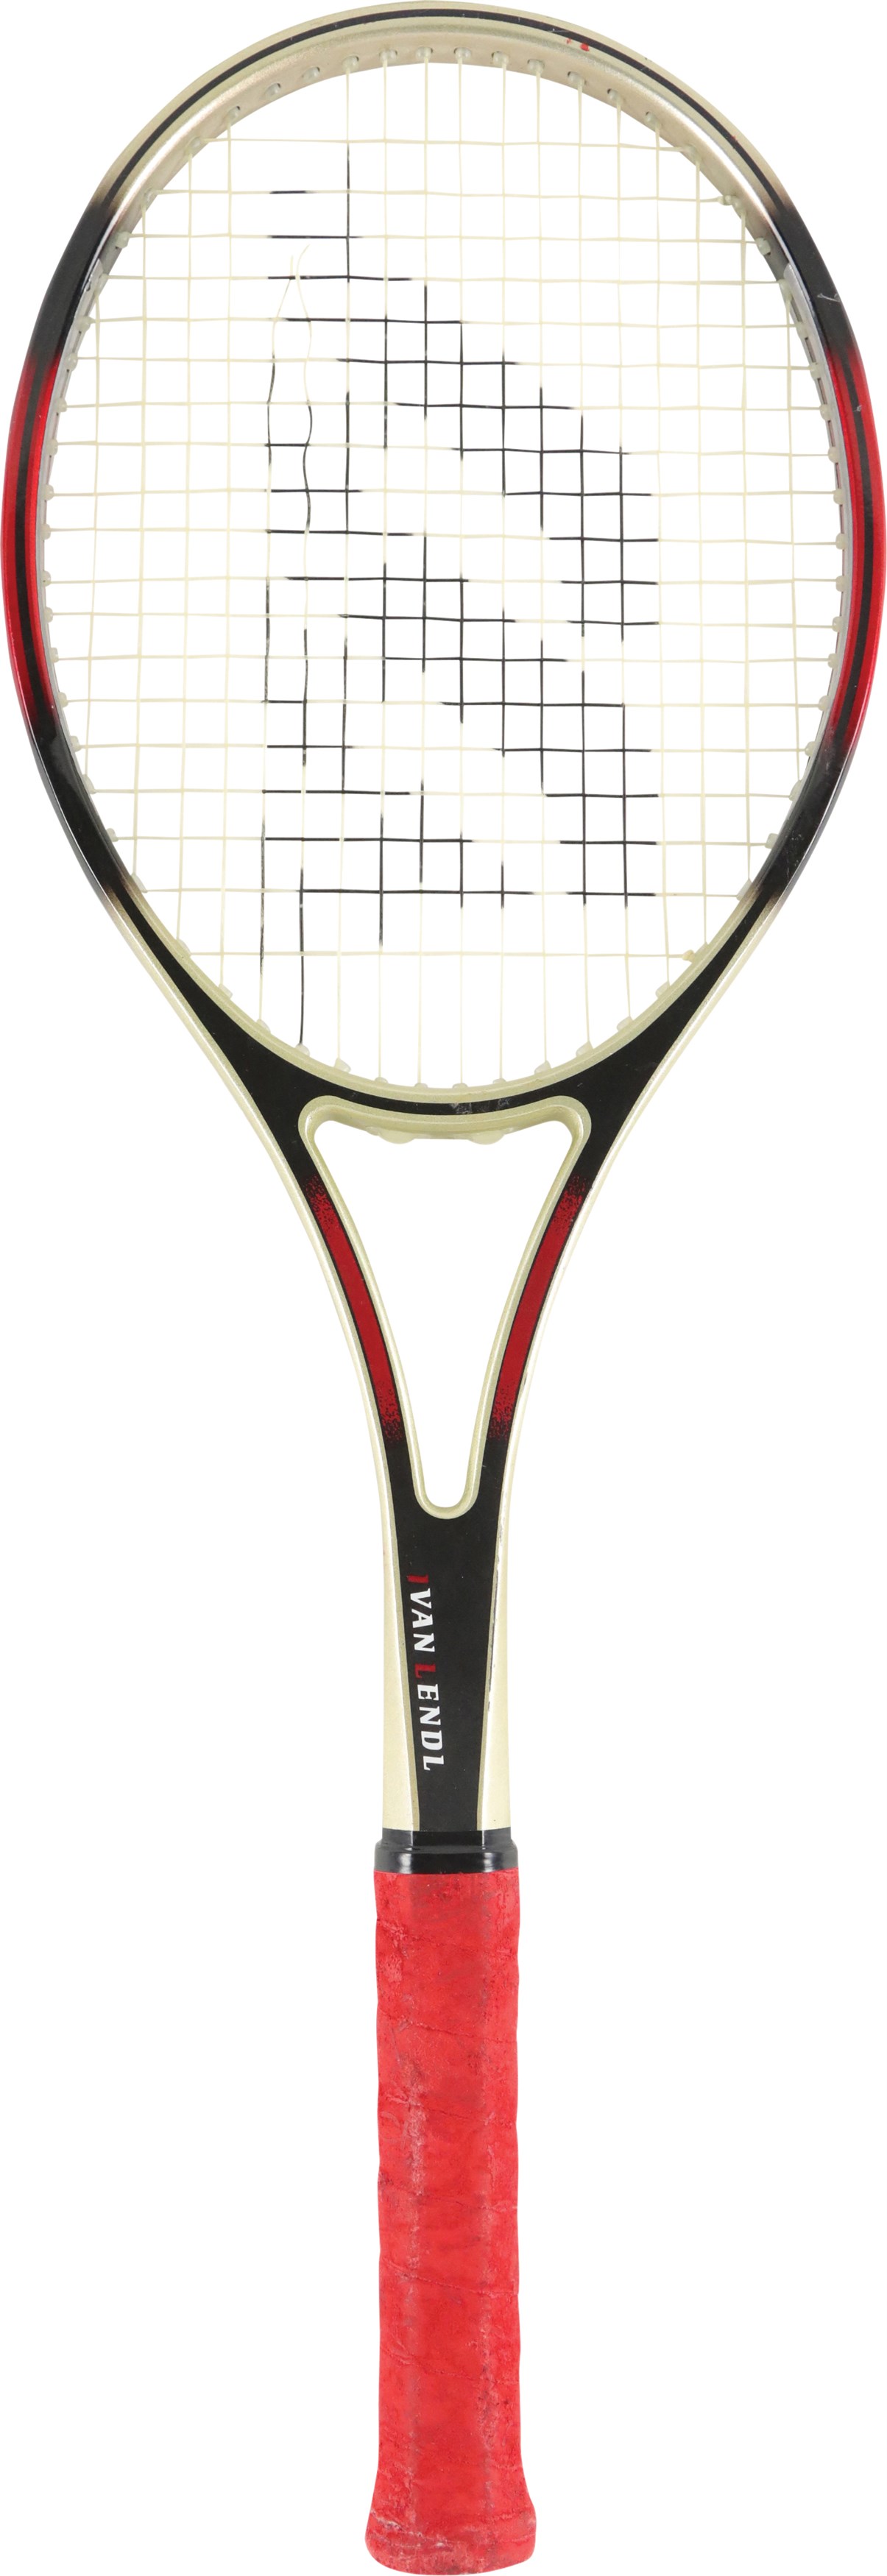 Olympics and All Sports - Ivan Lendl Match Used Tennis Racket